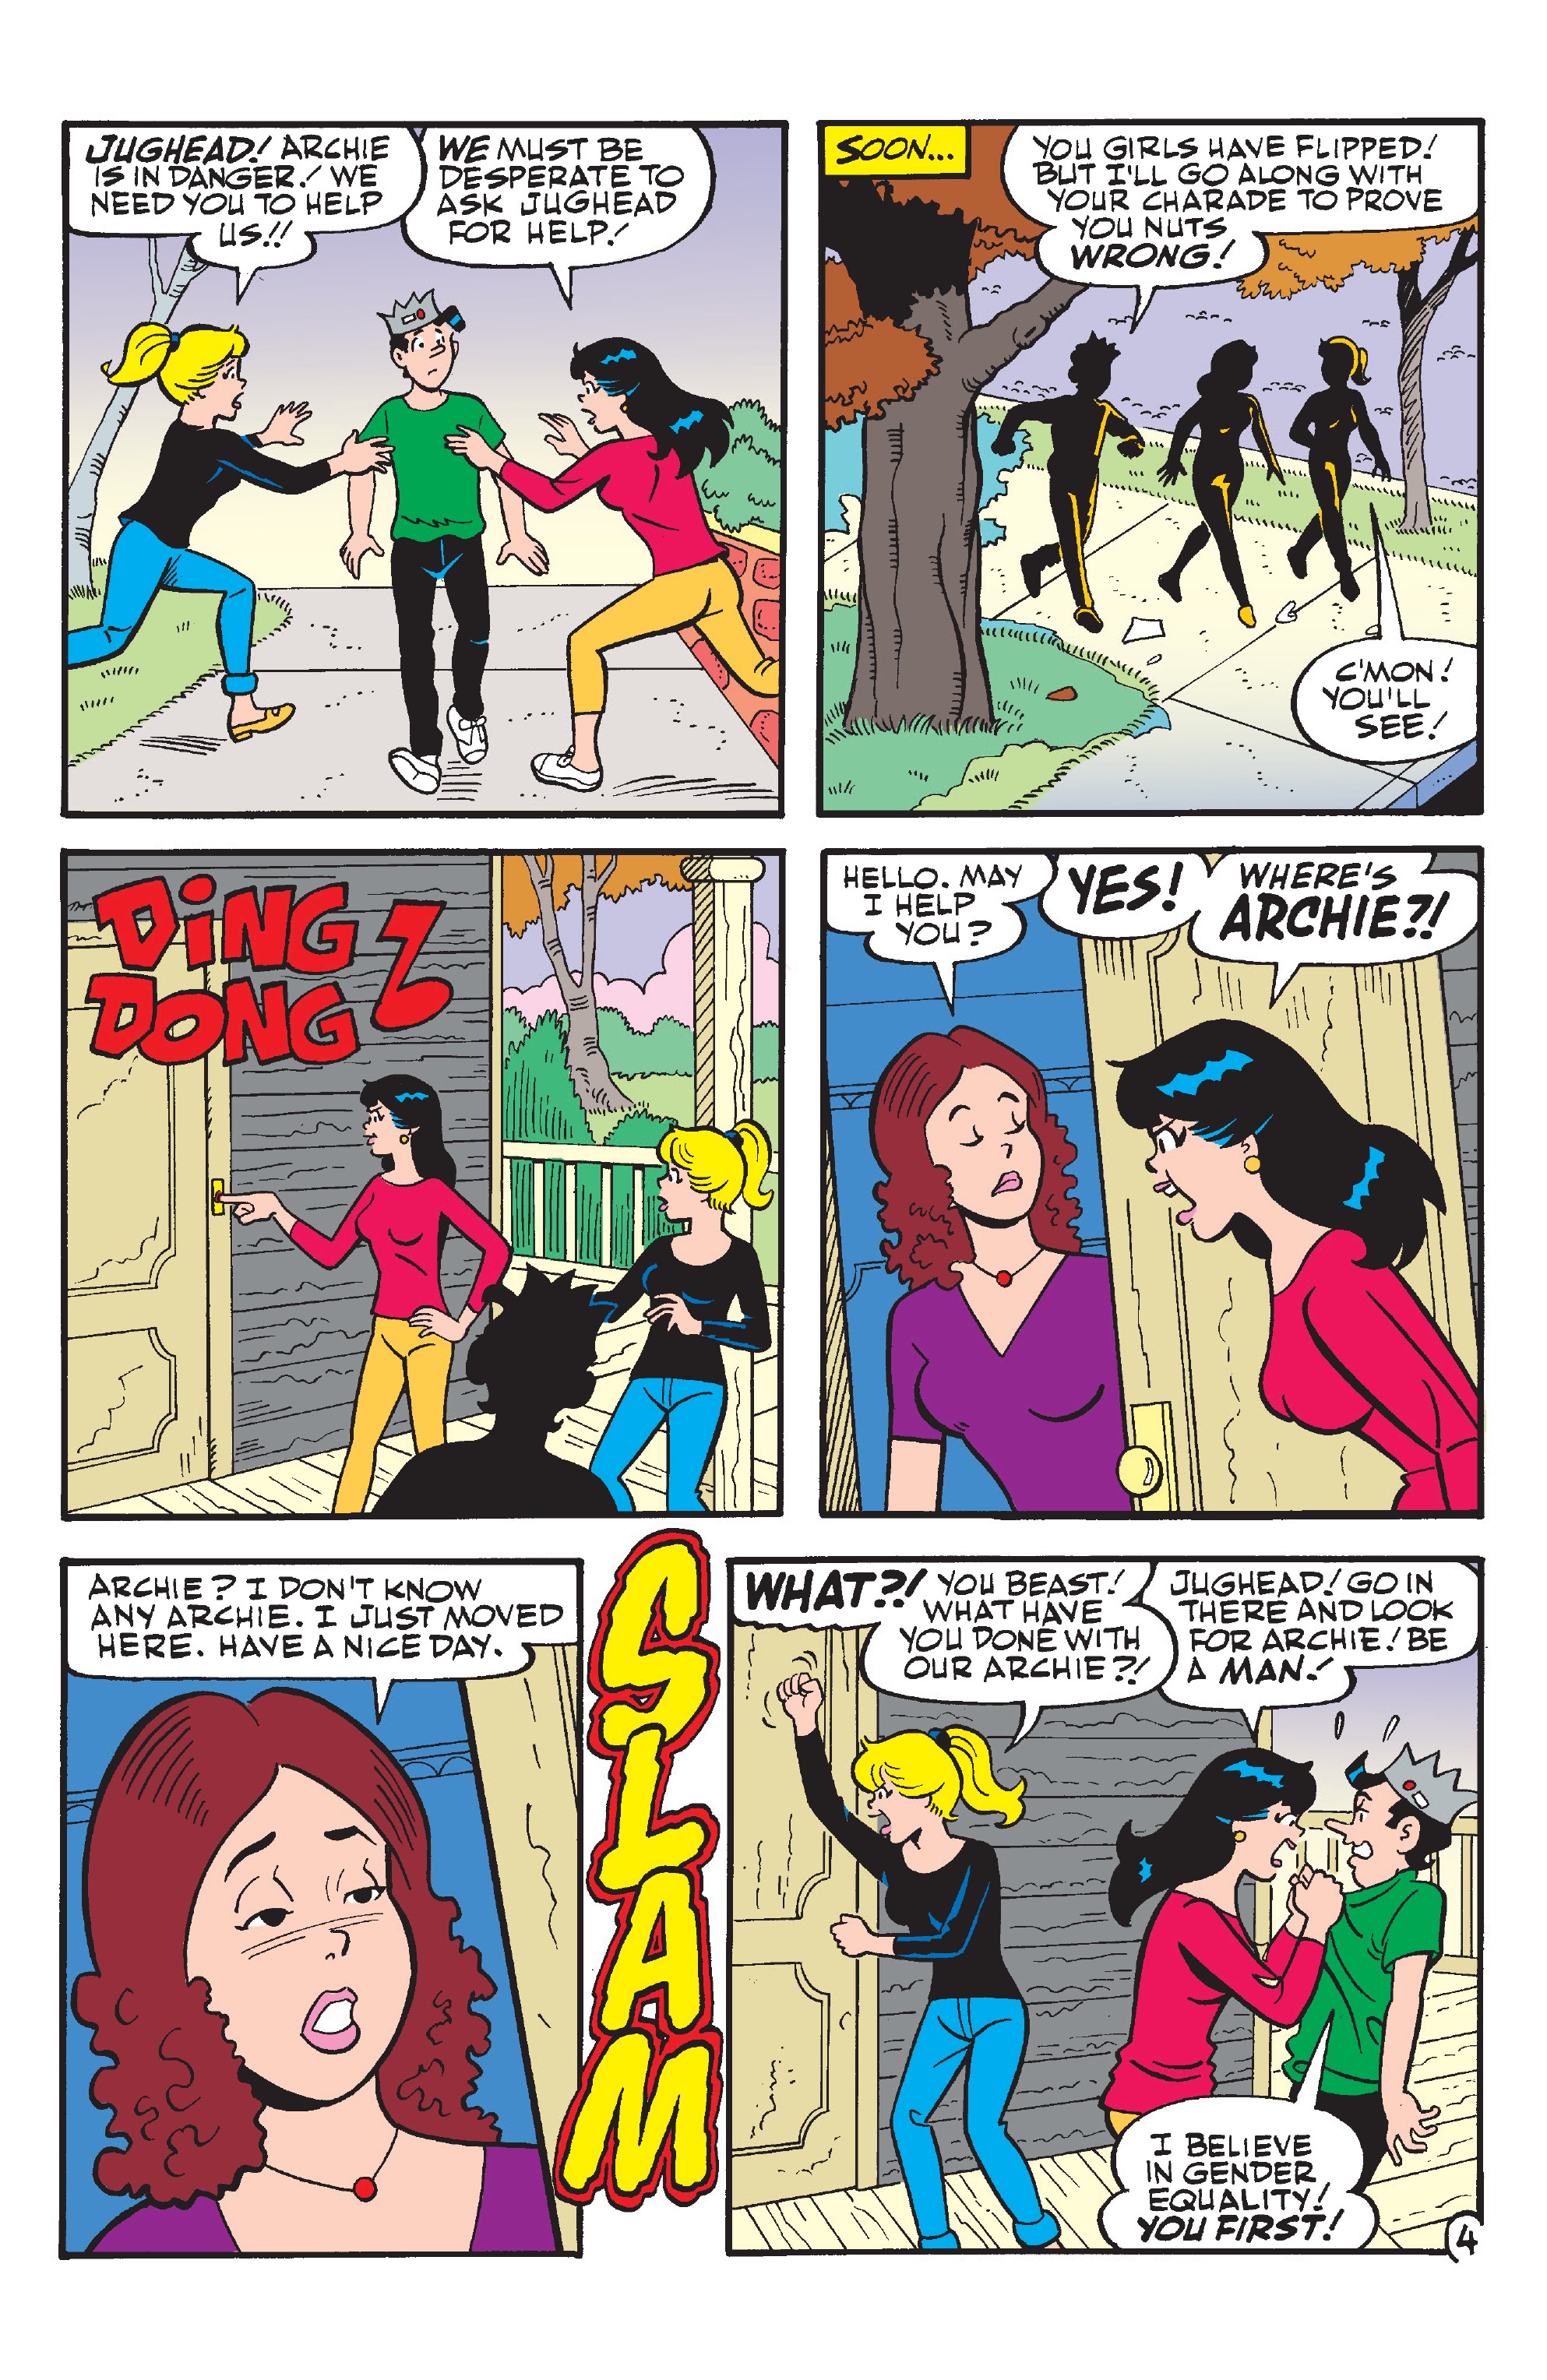 Archies Halloween Spectacular 2018 Chapter 1 Page 12 8434